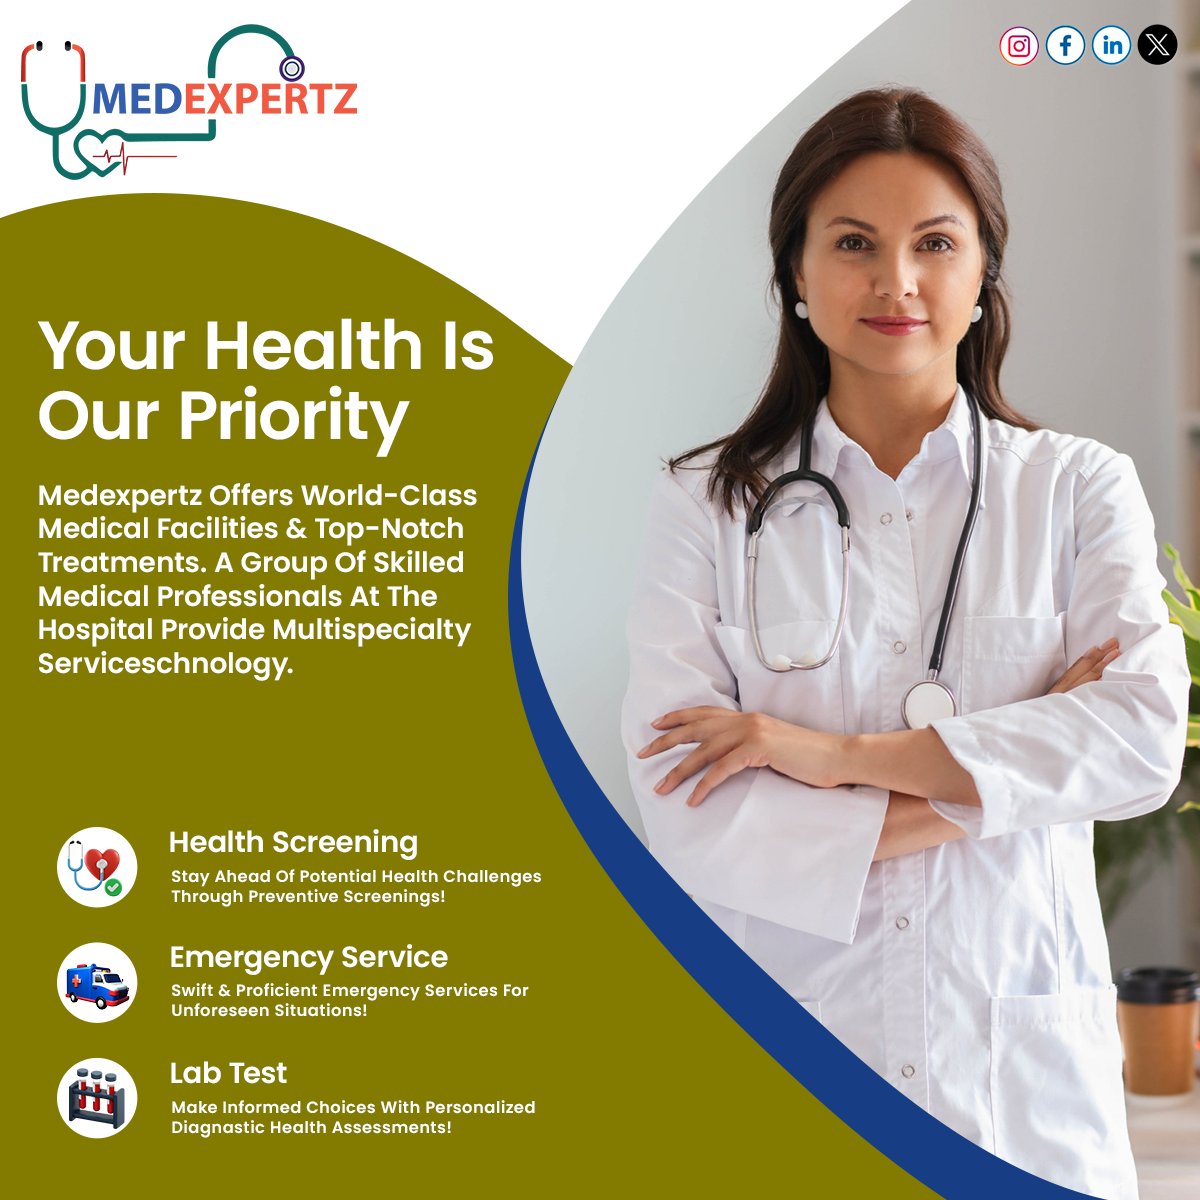 #YourHealthisOurPriority! Medexpertz provides online diagnostic and preventive care services, prioritizing quality healthcare accessibility at your doorsteps.

#medexpertz   #MedicalServices #Neurology #BookAppointment #ConsultDoctor #ConsultYourDoctorFromAnyWhere